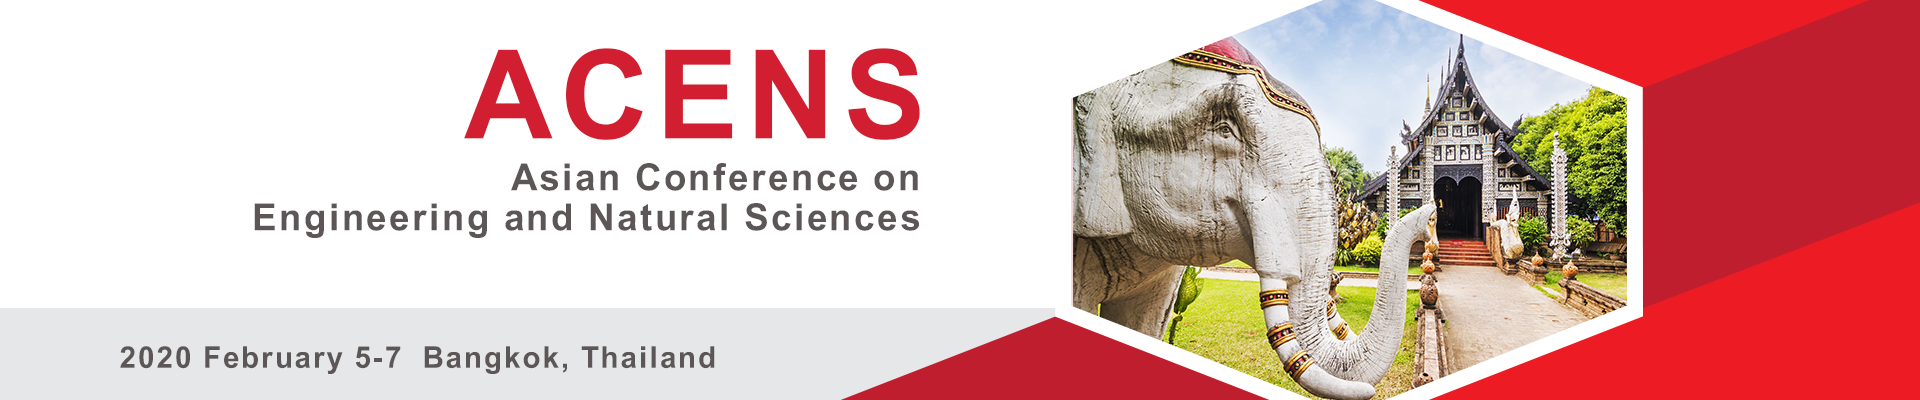 6th Asian Conference on Engineering and Natural Sciences